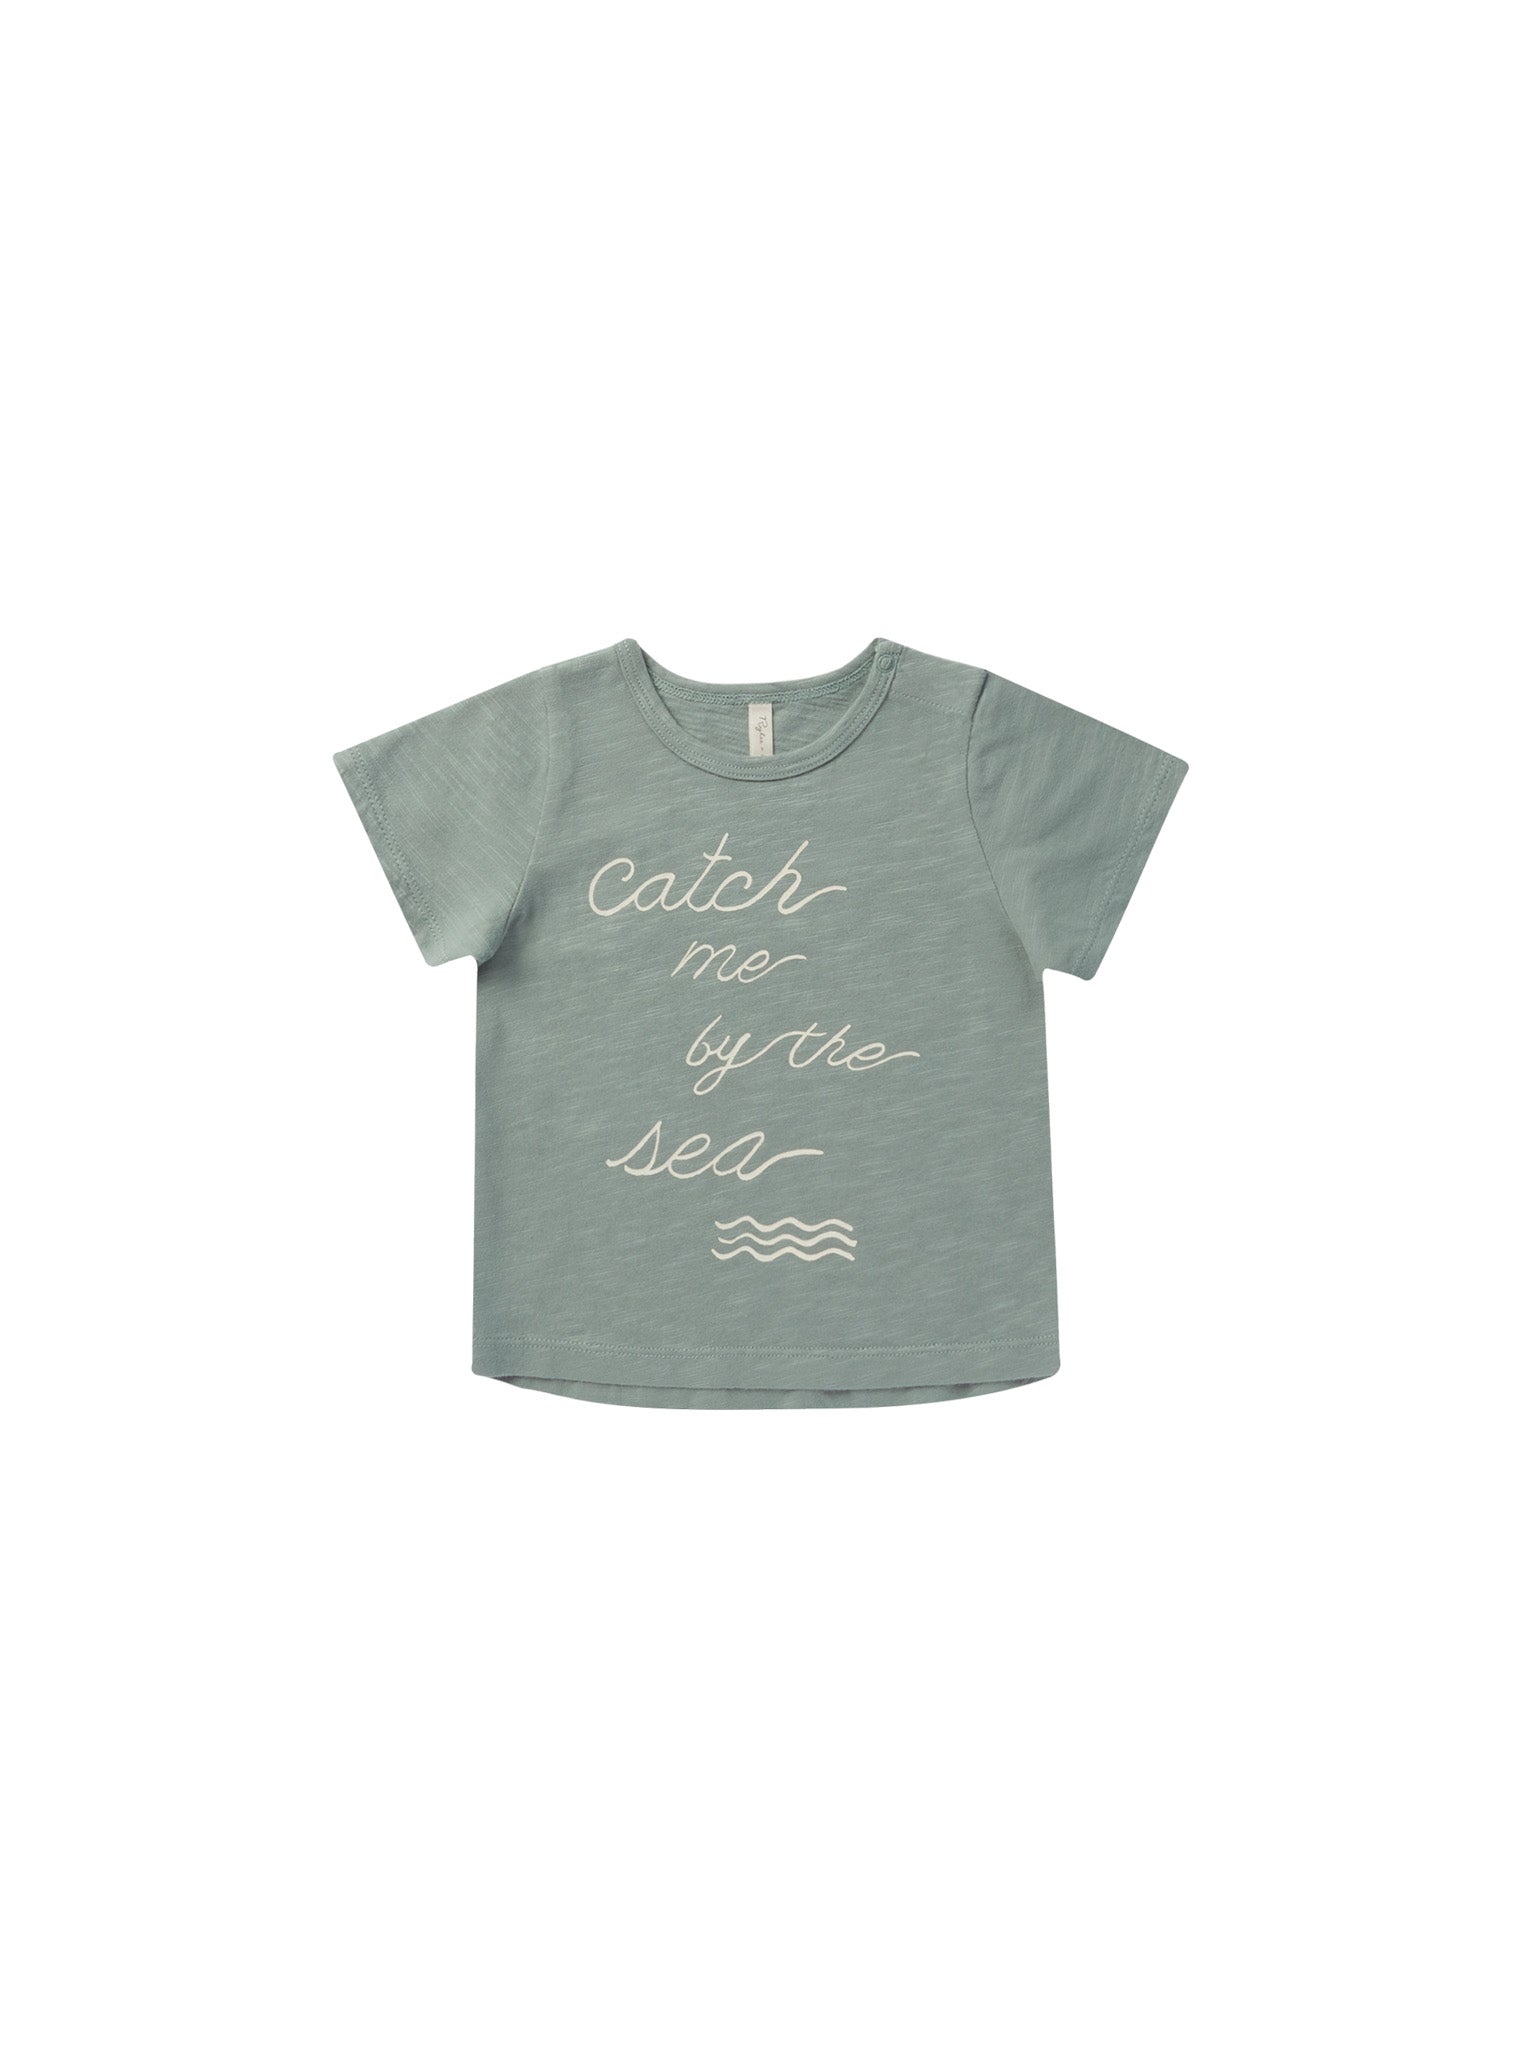 Basic Tee | Catch Me By the Sea